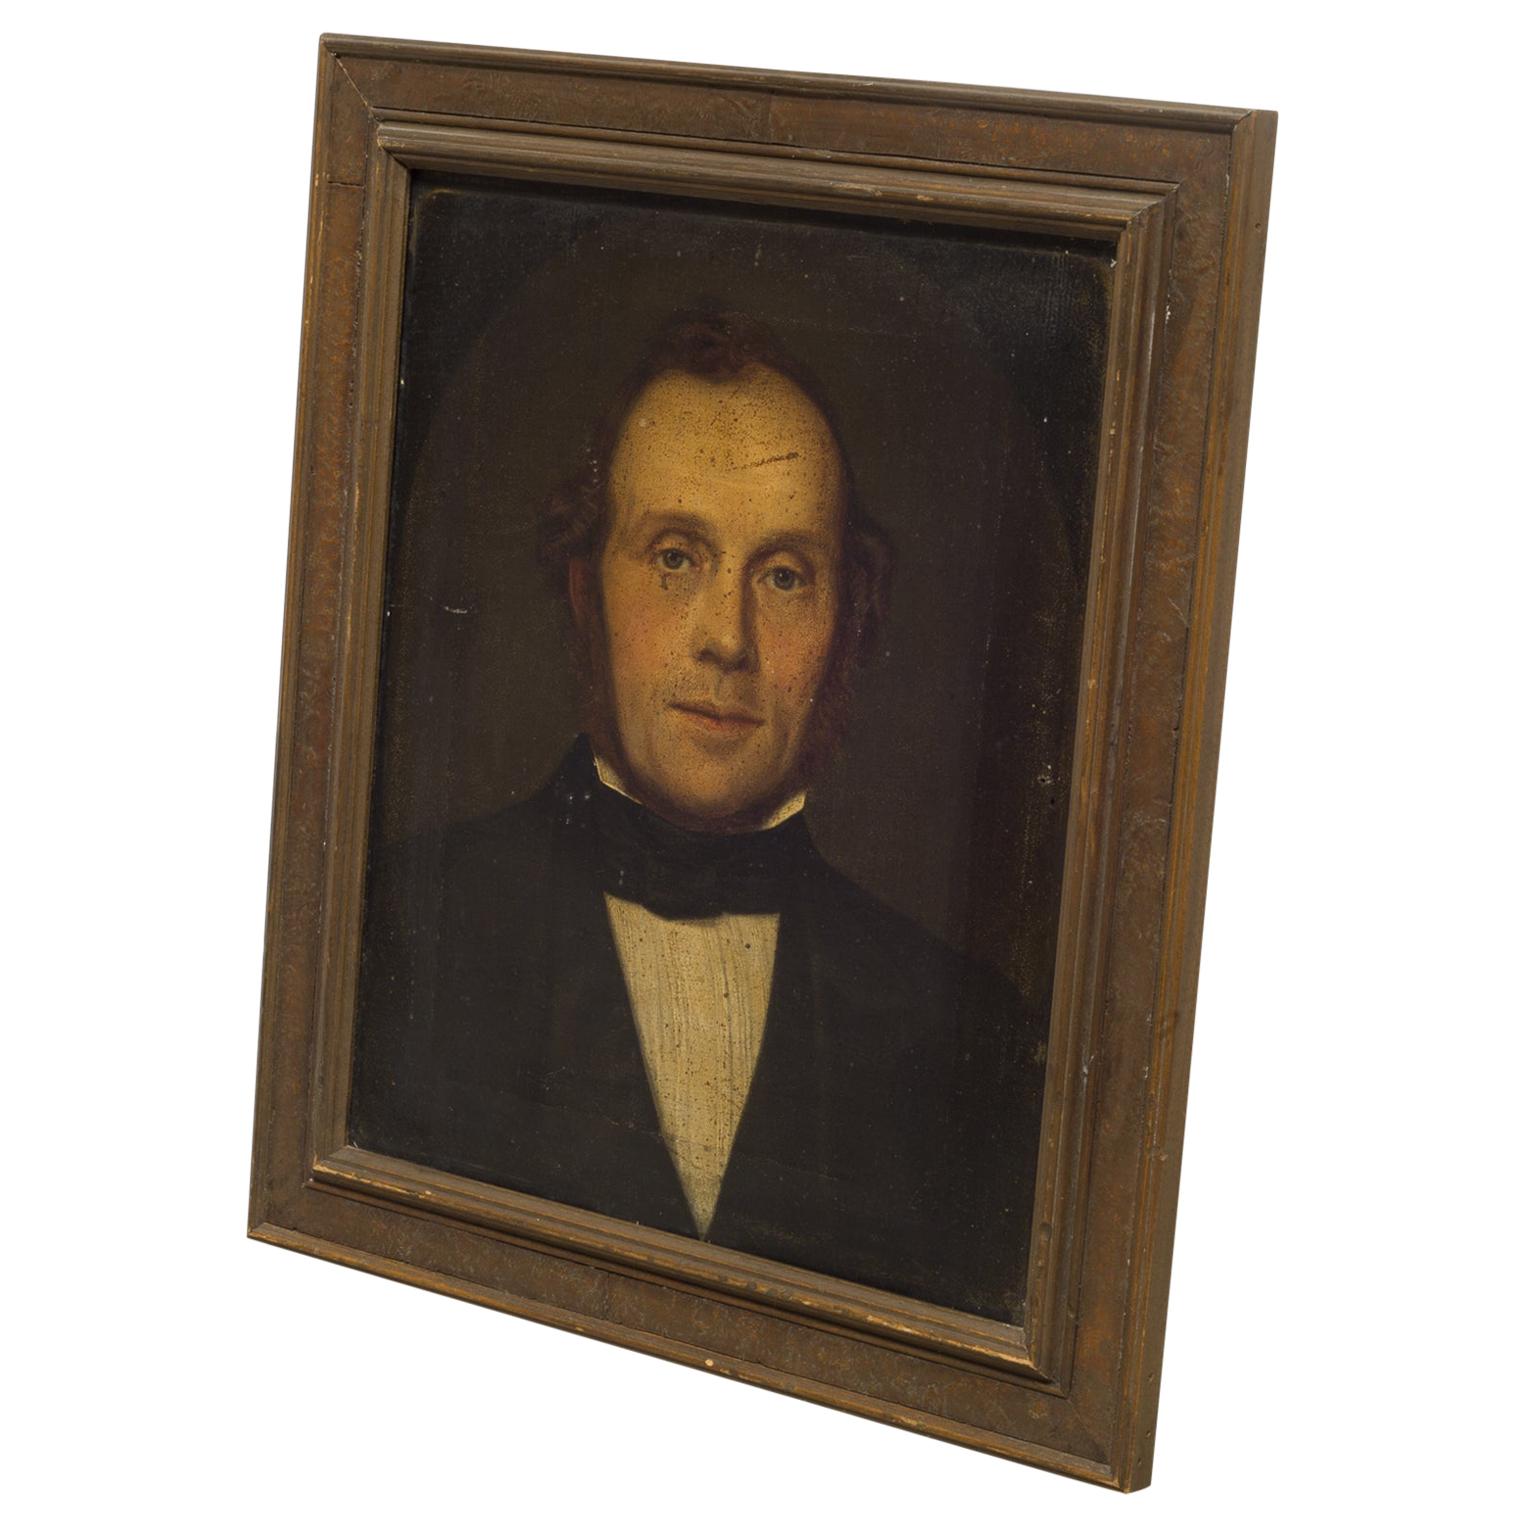 About

This is an original unsigned 19th century oil portrait of a gentleman. The frame is early 20th century. This piece has retained its original finish.

Creator: Unknown.
Date of manufacture: circa 1800s.
Materials and techniques: Oil on